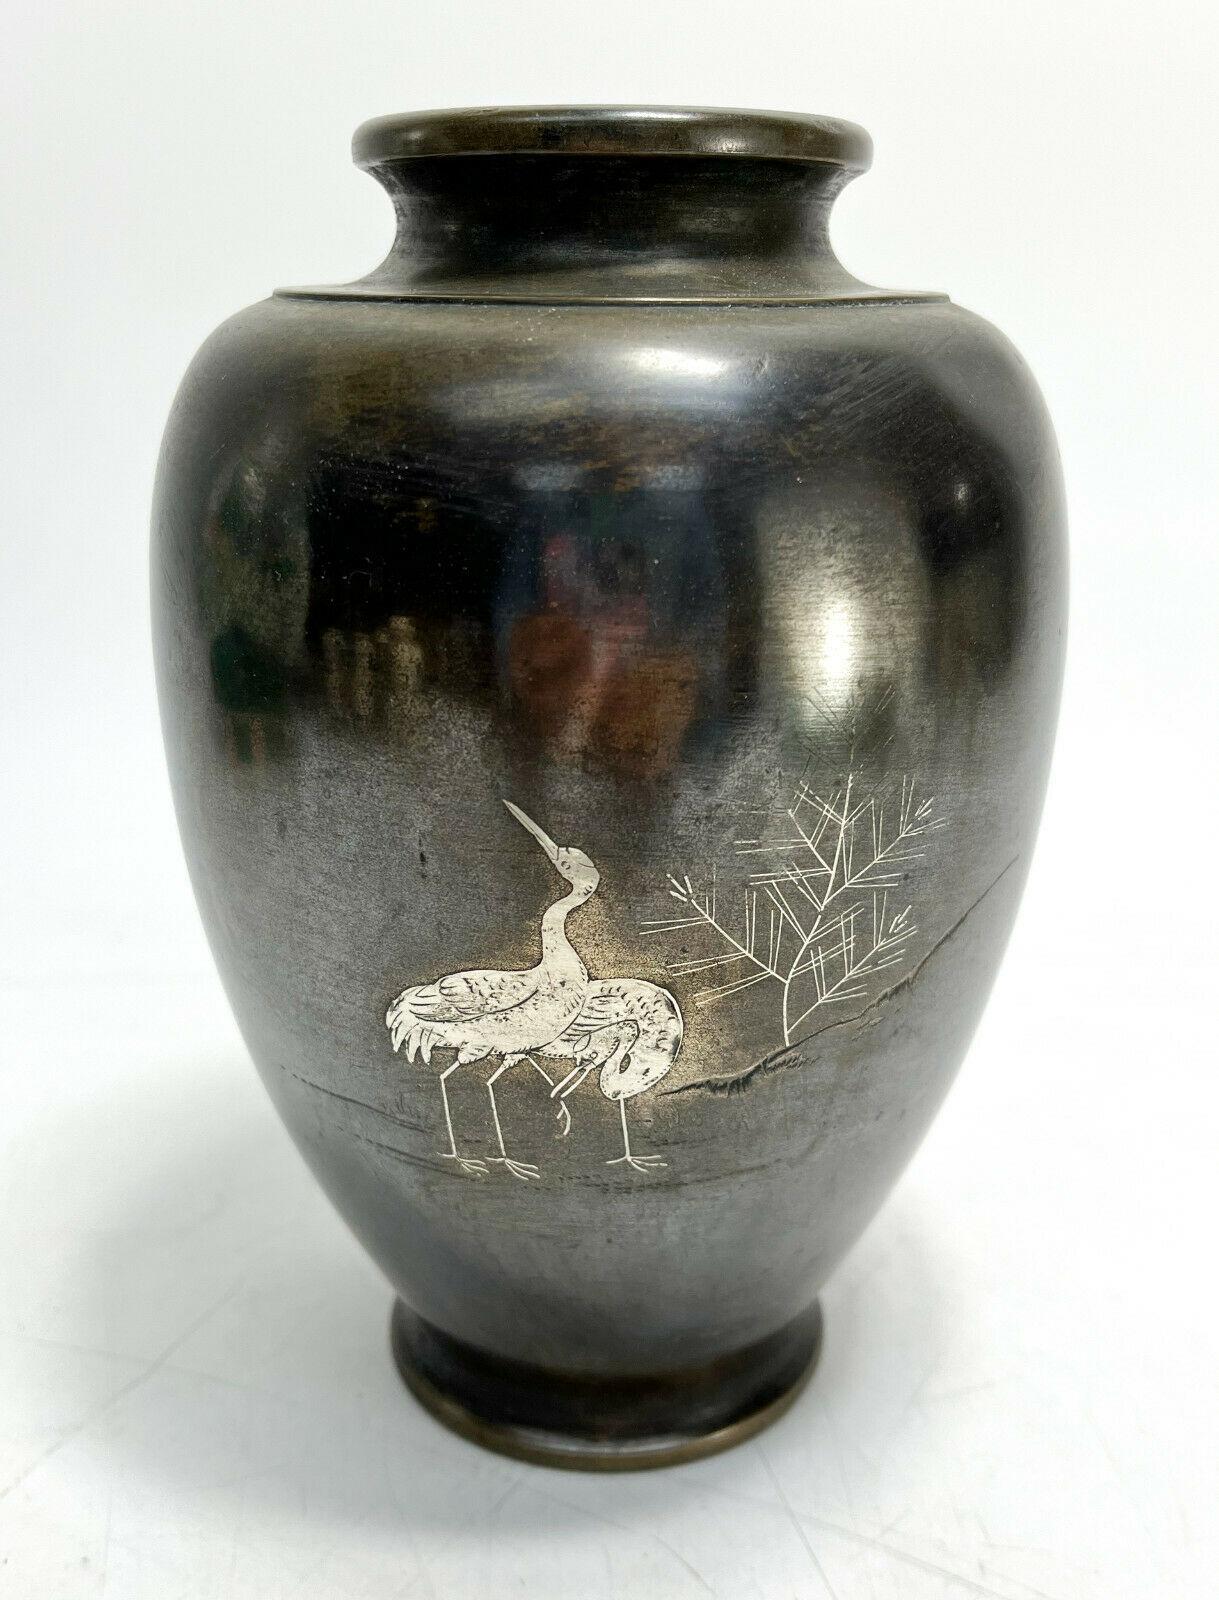 Japanese mixed metal bronze and silver vase, storks, likely Meiji Period.

The central area depicts silver inlaid storks next to a leafless tree. With extensive Japanese maker hallmarks to the underside base. Likely from Japan's Meiji Period